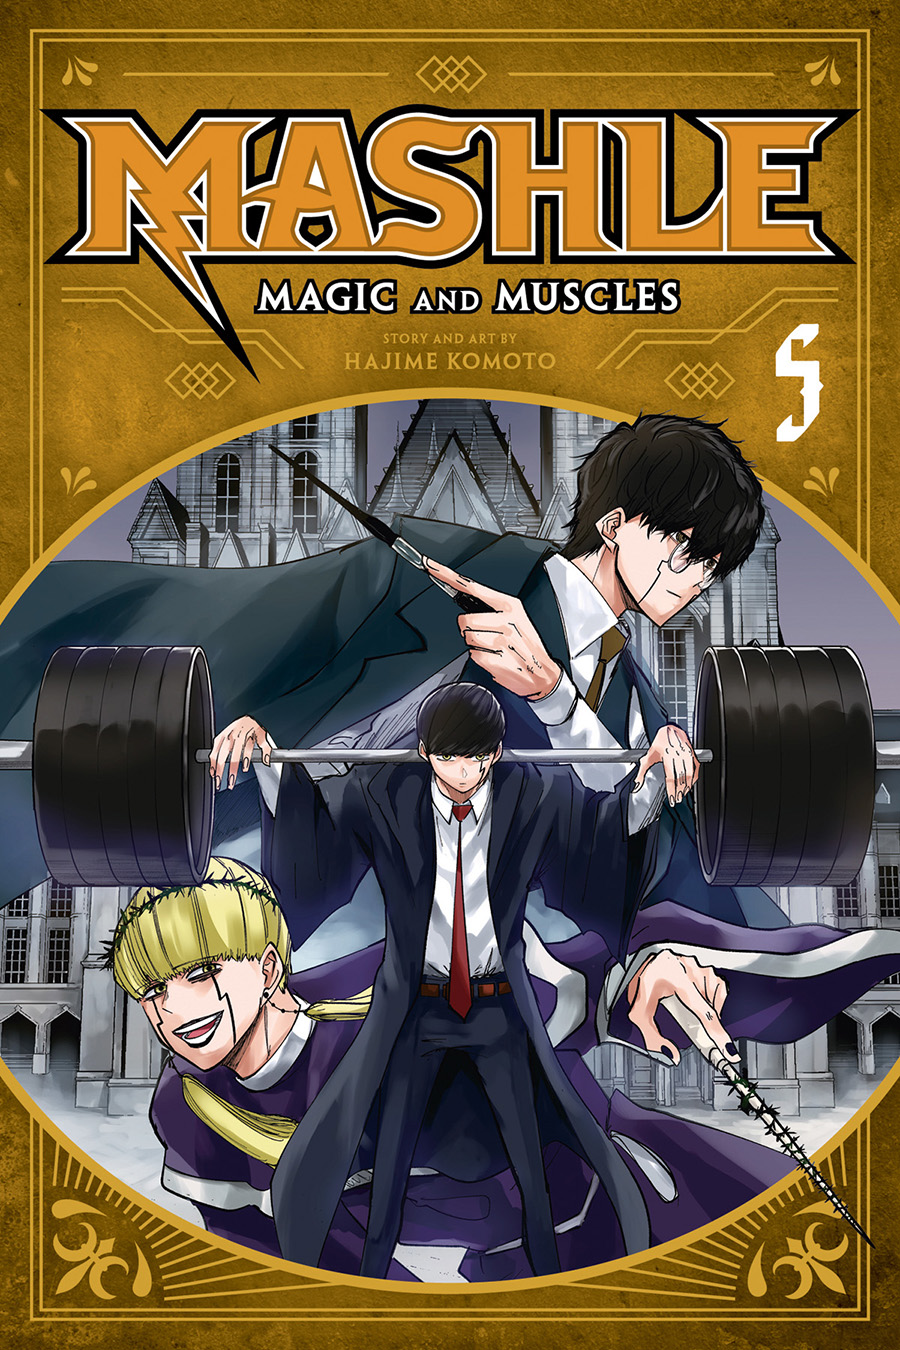 Mashle Magic And Muscles Vol 5 GN